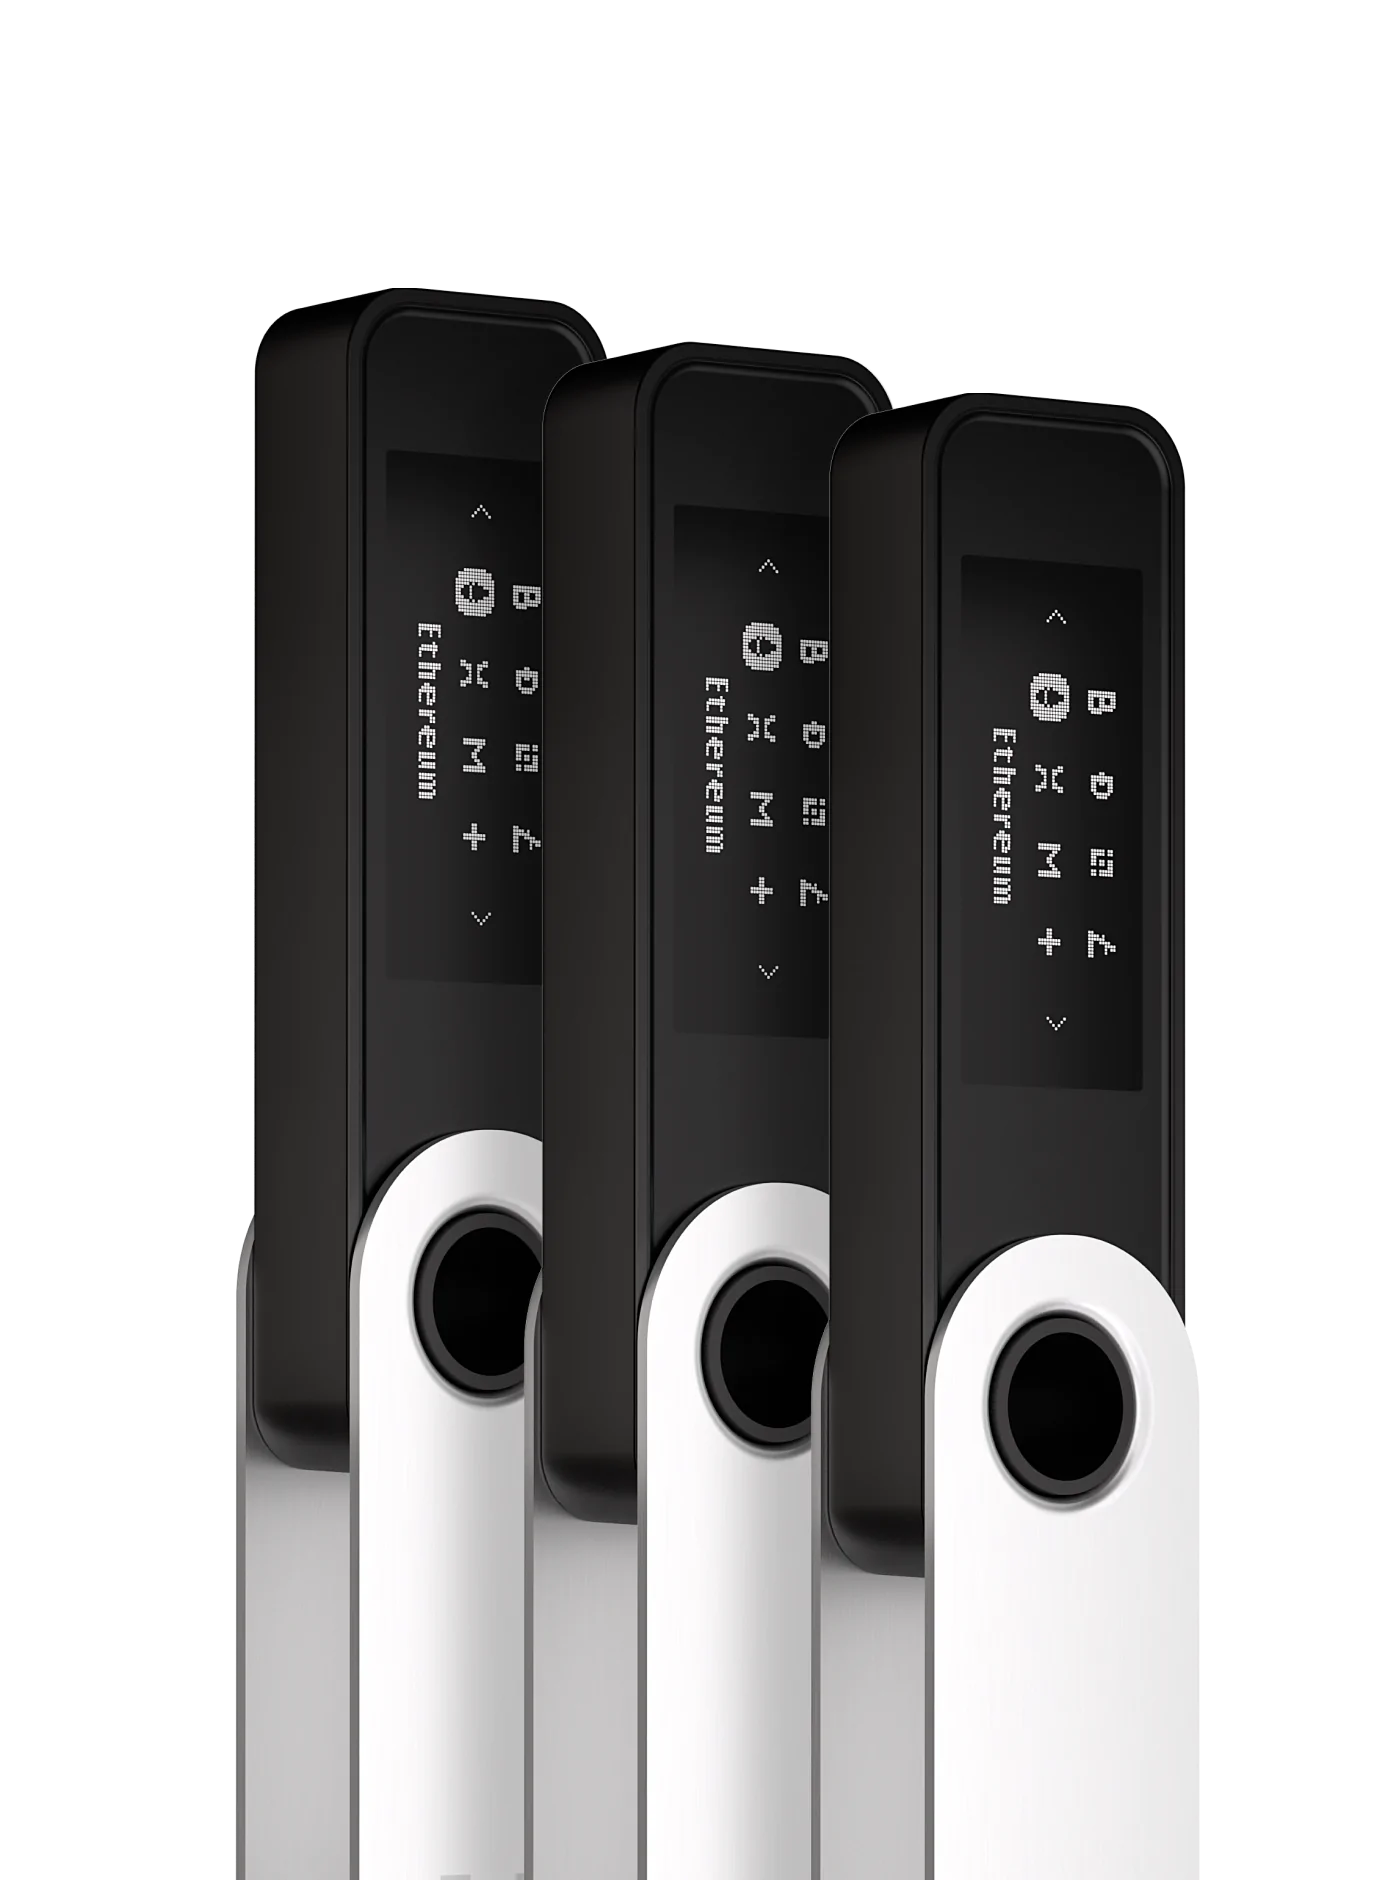 ledger wallet family pack Ledger Nano S Plus - Most secure wallet available for crypto